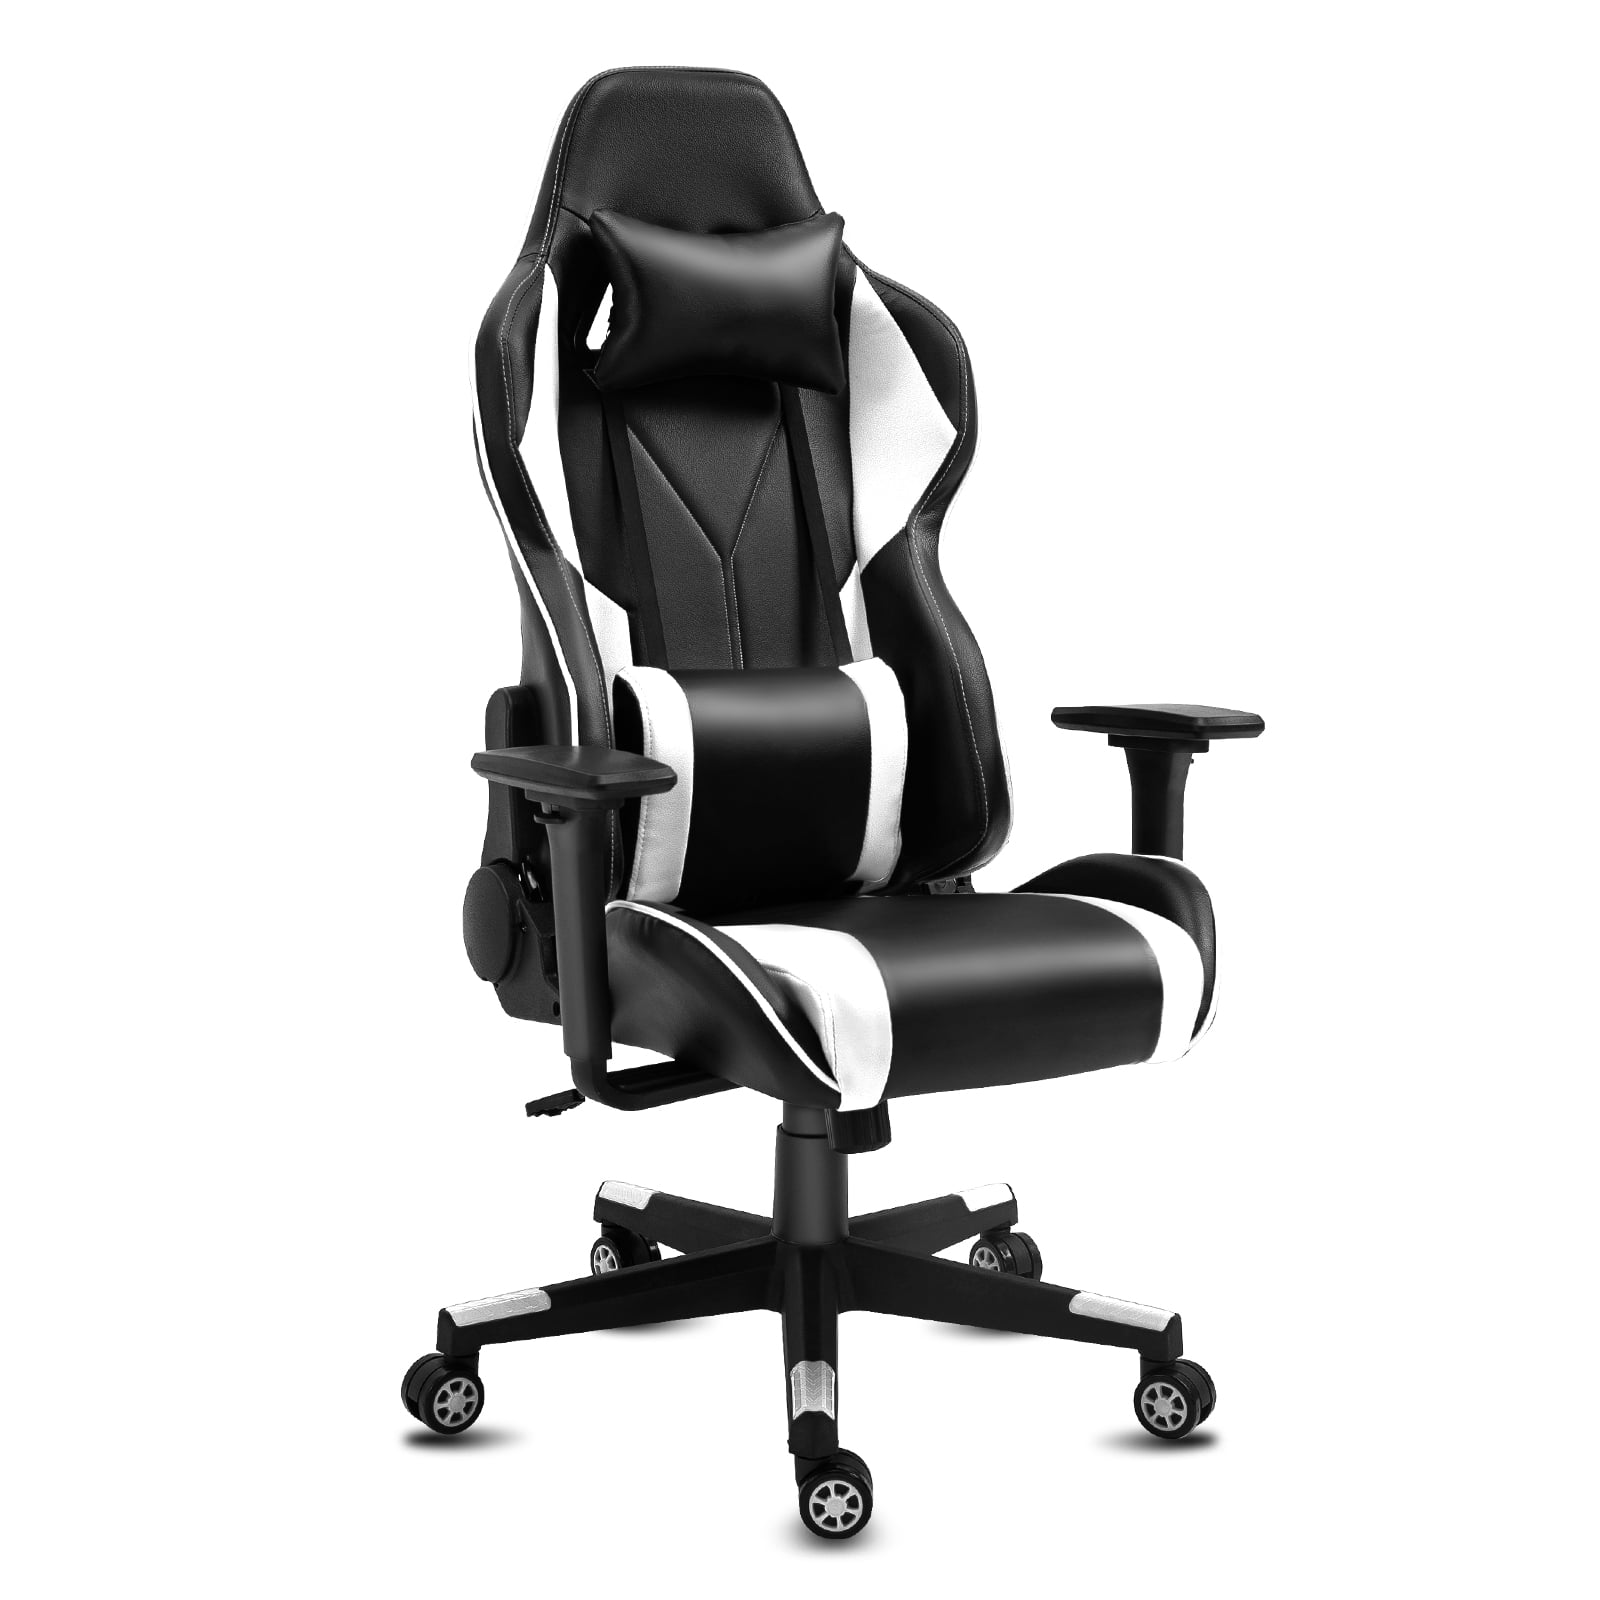 Blue Merax Ergonomic Racing Gaming Chair Swivel Executive Computer Desk Chair High Back Big and Tall Home Office Reclining Chair with Headrest and Lumbar Support 